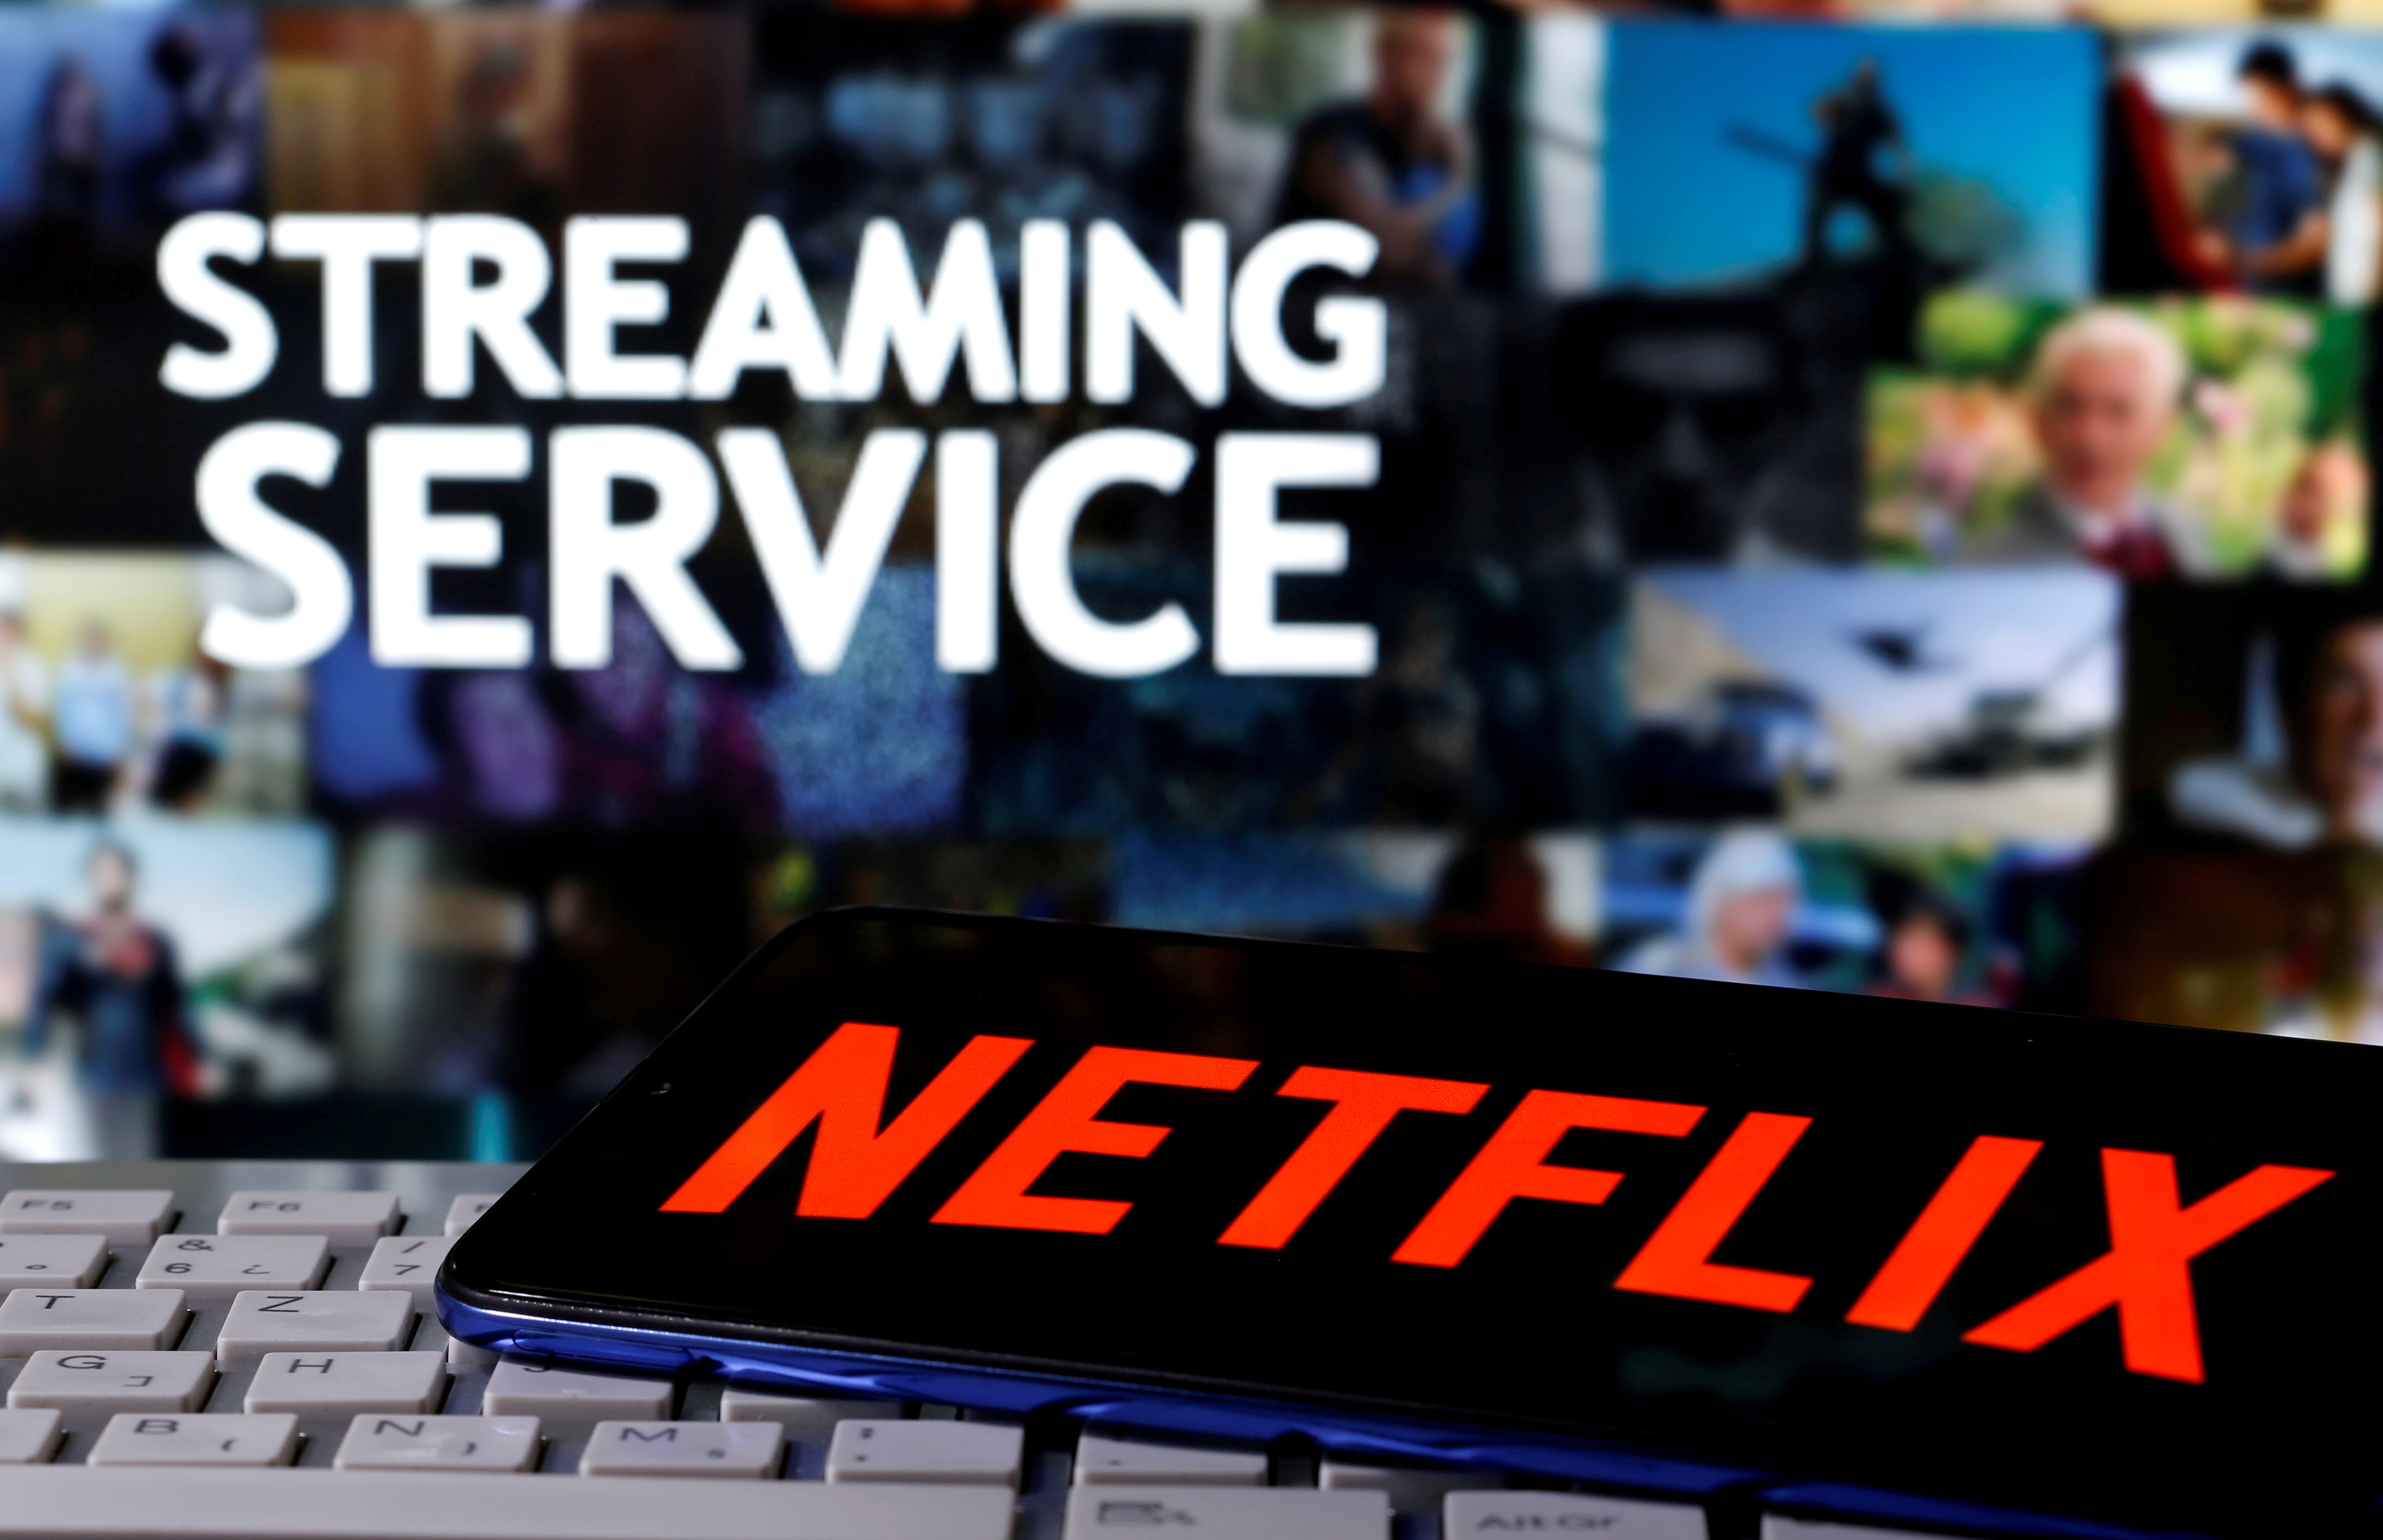 FILE PHOTO: A smartphone with the Netflix logo is seen on a keyboard in front of displayed "Streaming service" words in this illustration taken March 24, 2020. REUTERS/Dado Ruvic/File Photo